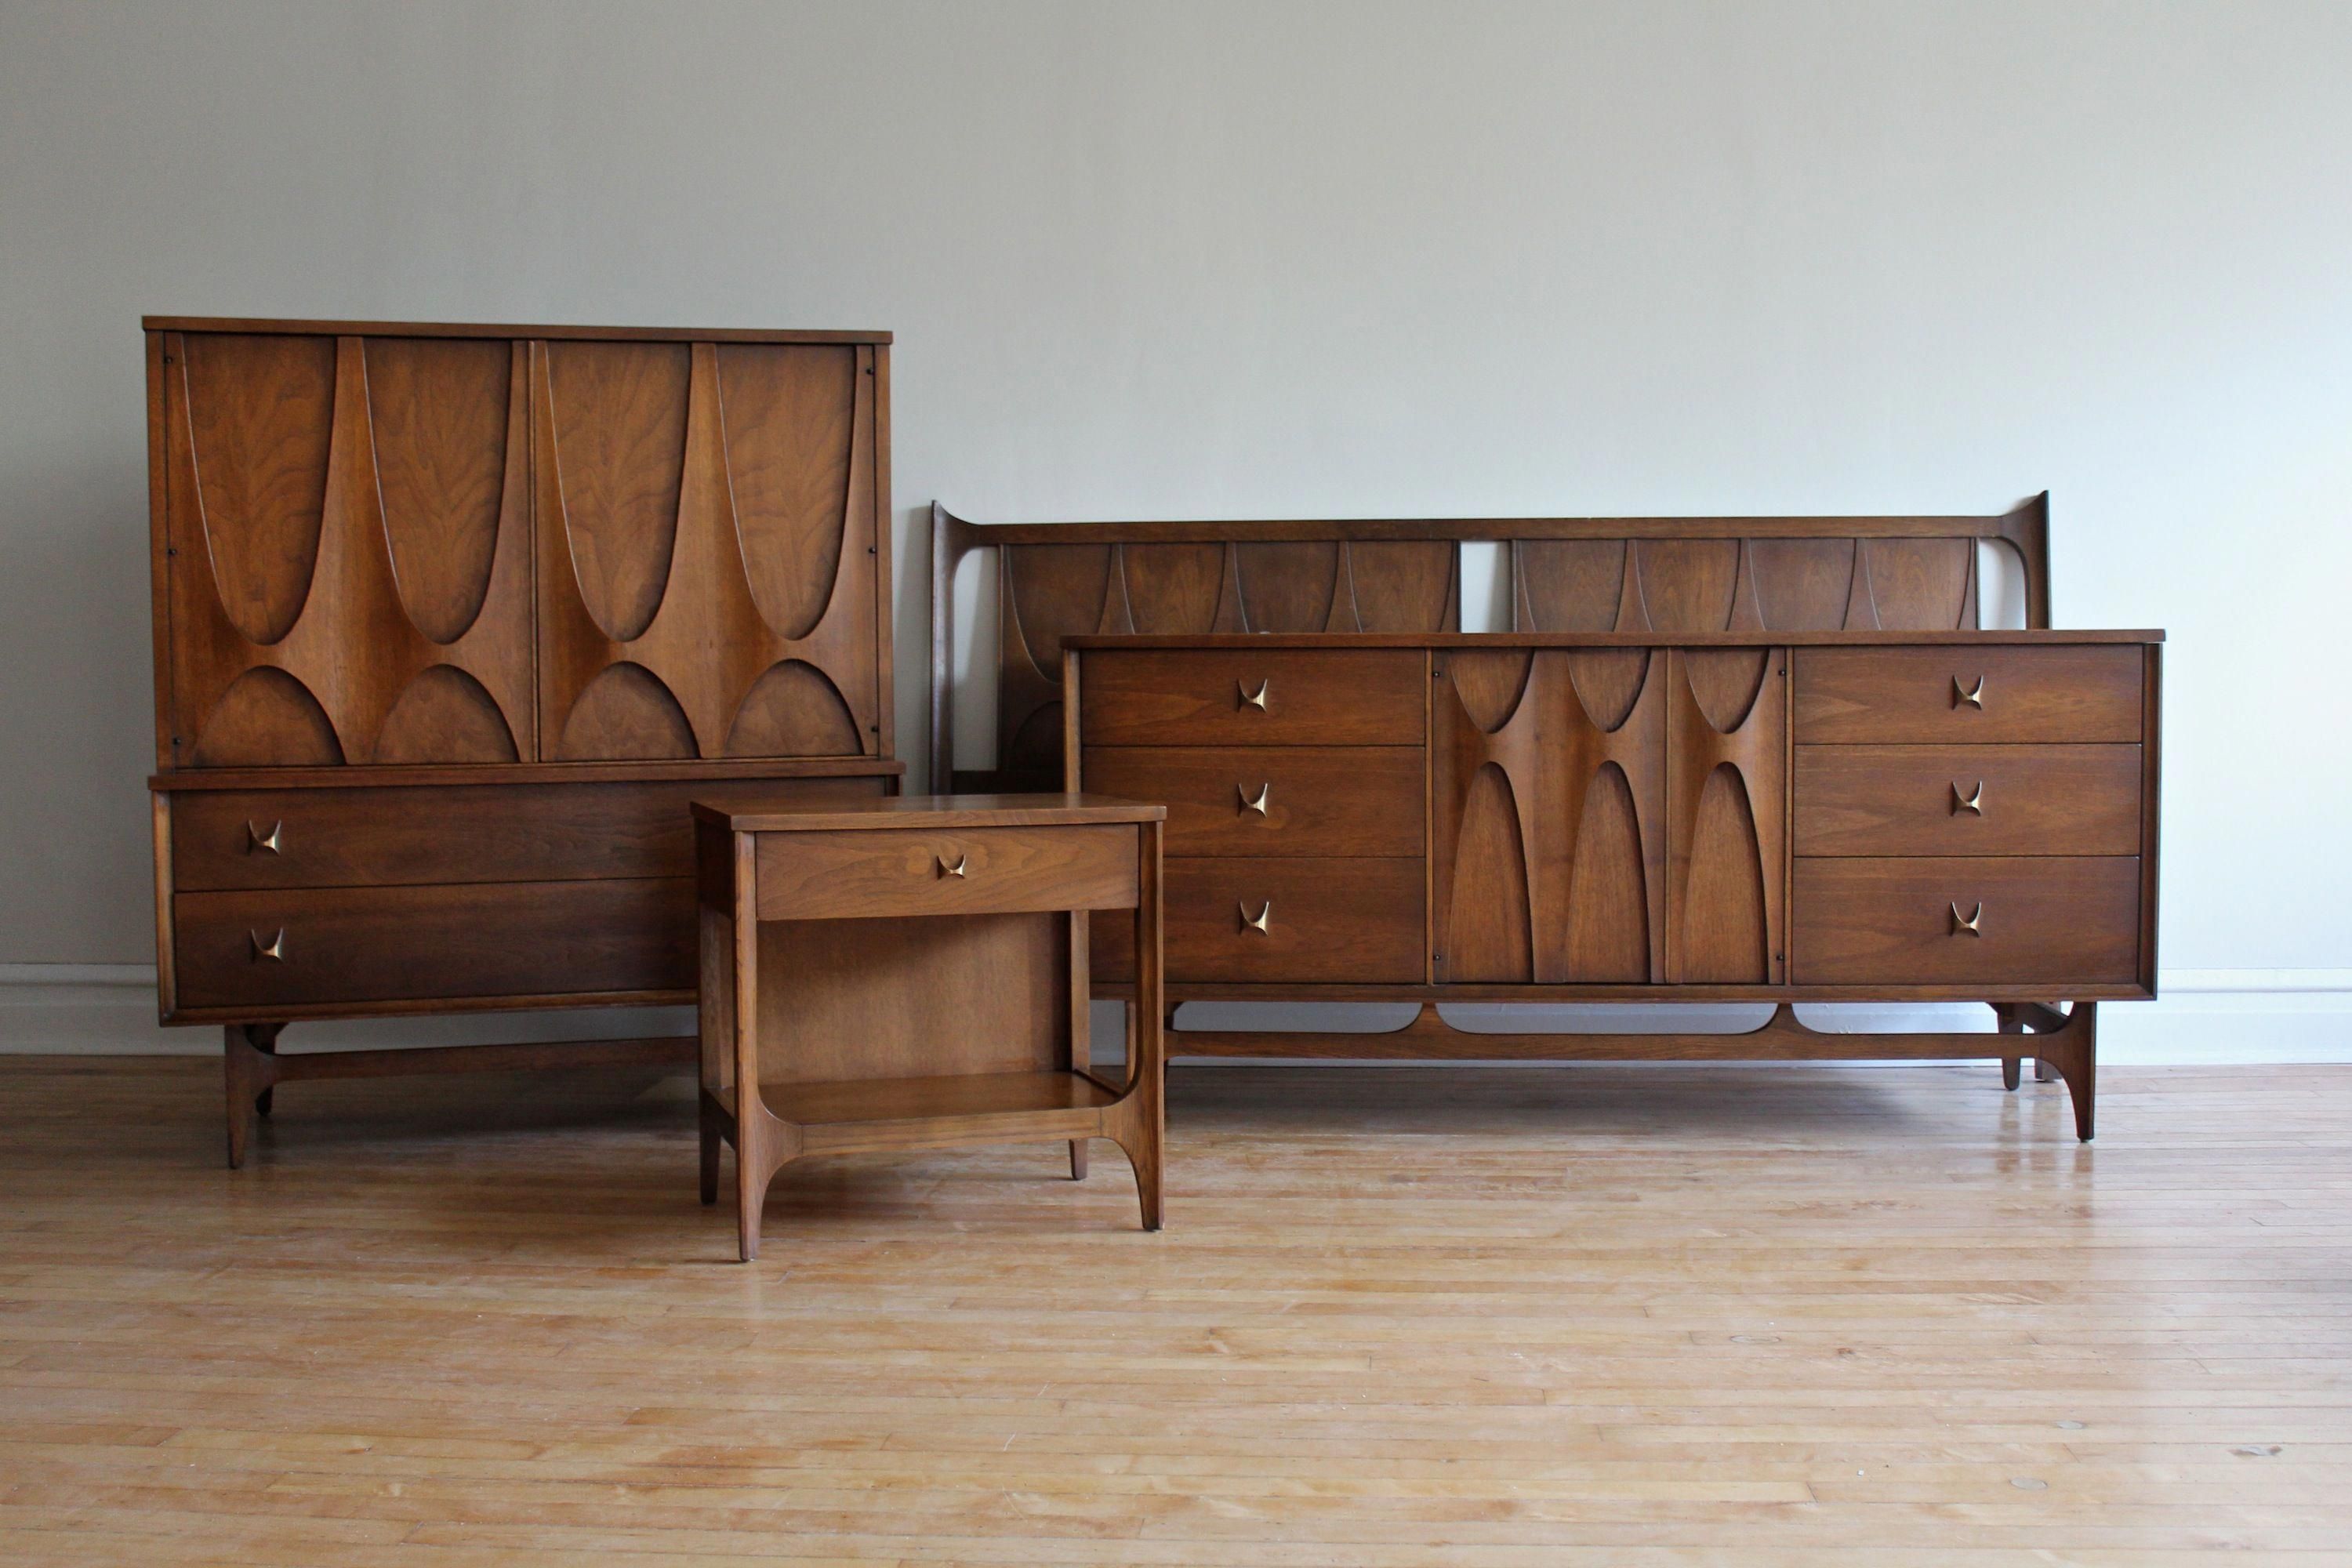 A Guide To Buying Mid Century Modern Furniture: Classic Style Made Easy